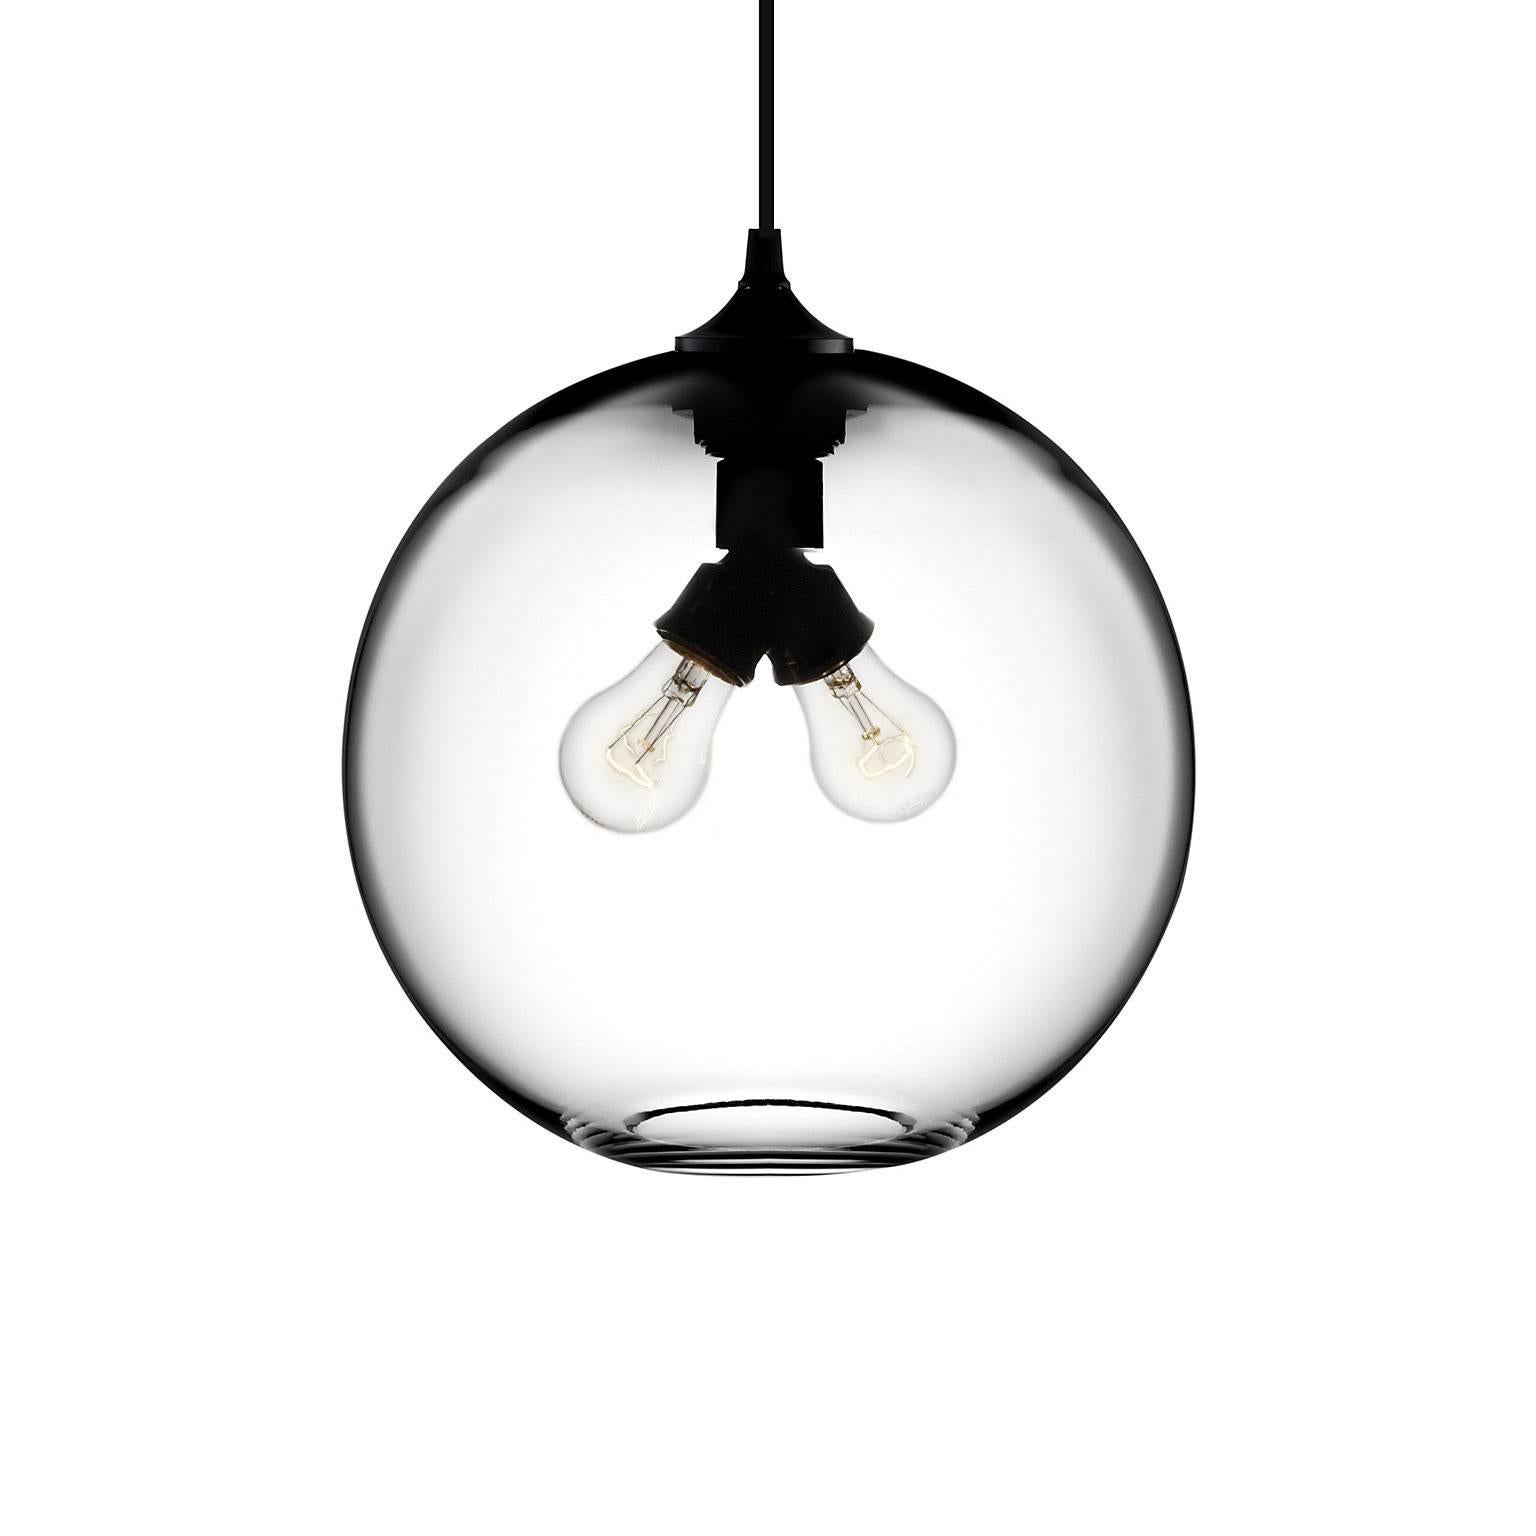 The allure of the Binary pendant is the presence of two bulbs at the pendant’s centre, radiating rich, ambient light. Every single glass pendant light that comes from Niche is hand-blown by real human beings in a state-of-the-art studio located in